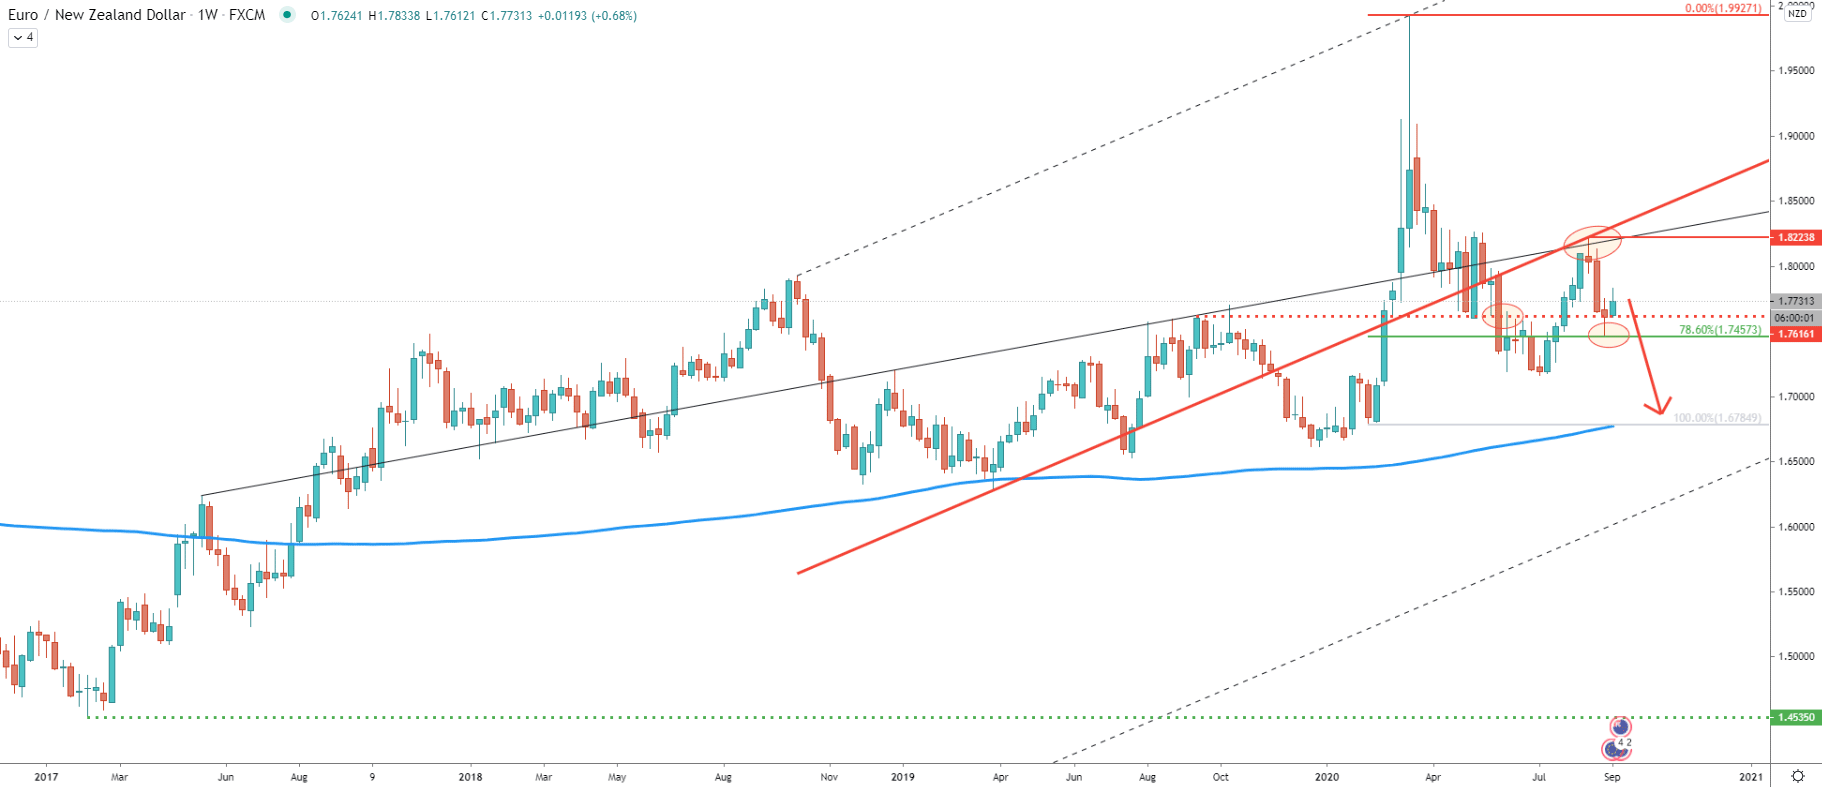 EUR/NZD Weekly Technical Analysis 11 Sep 2020